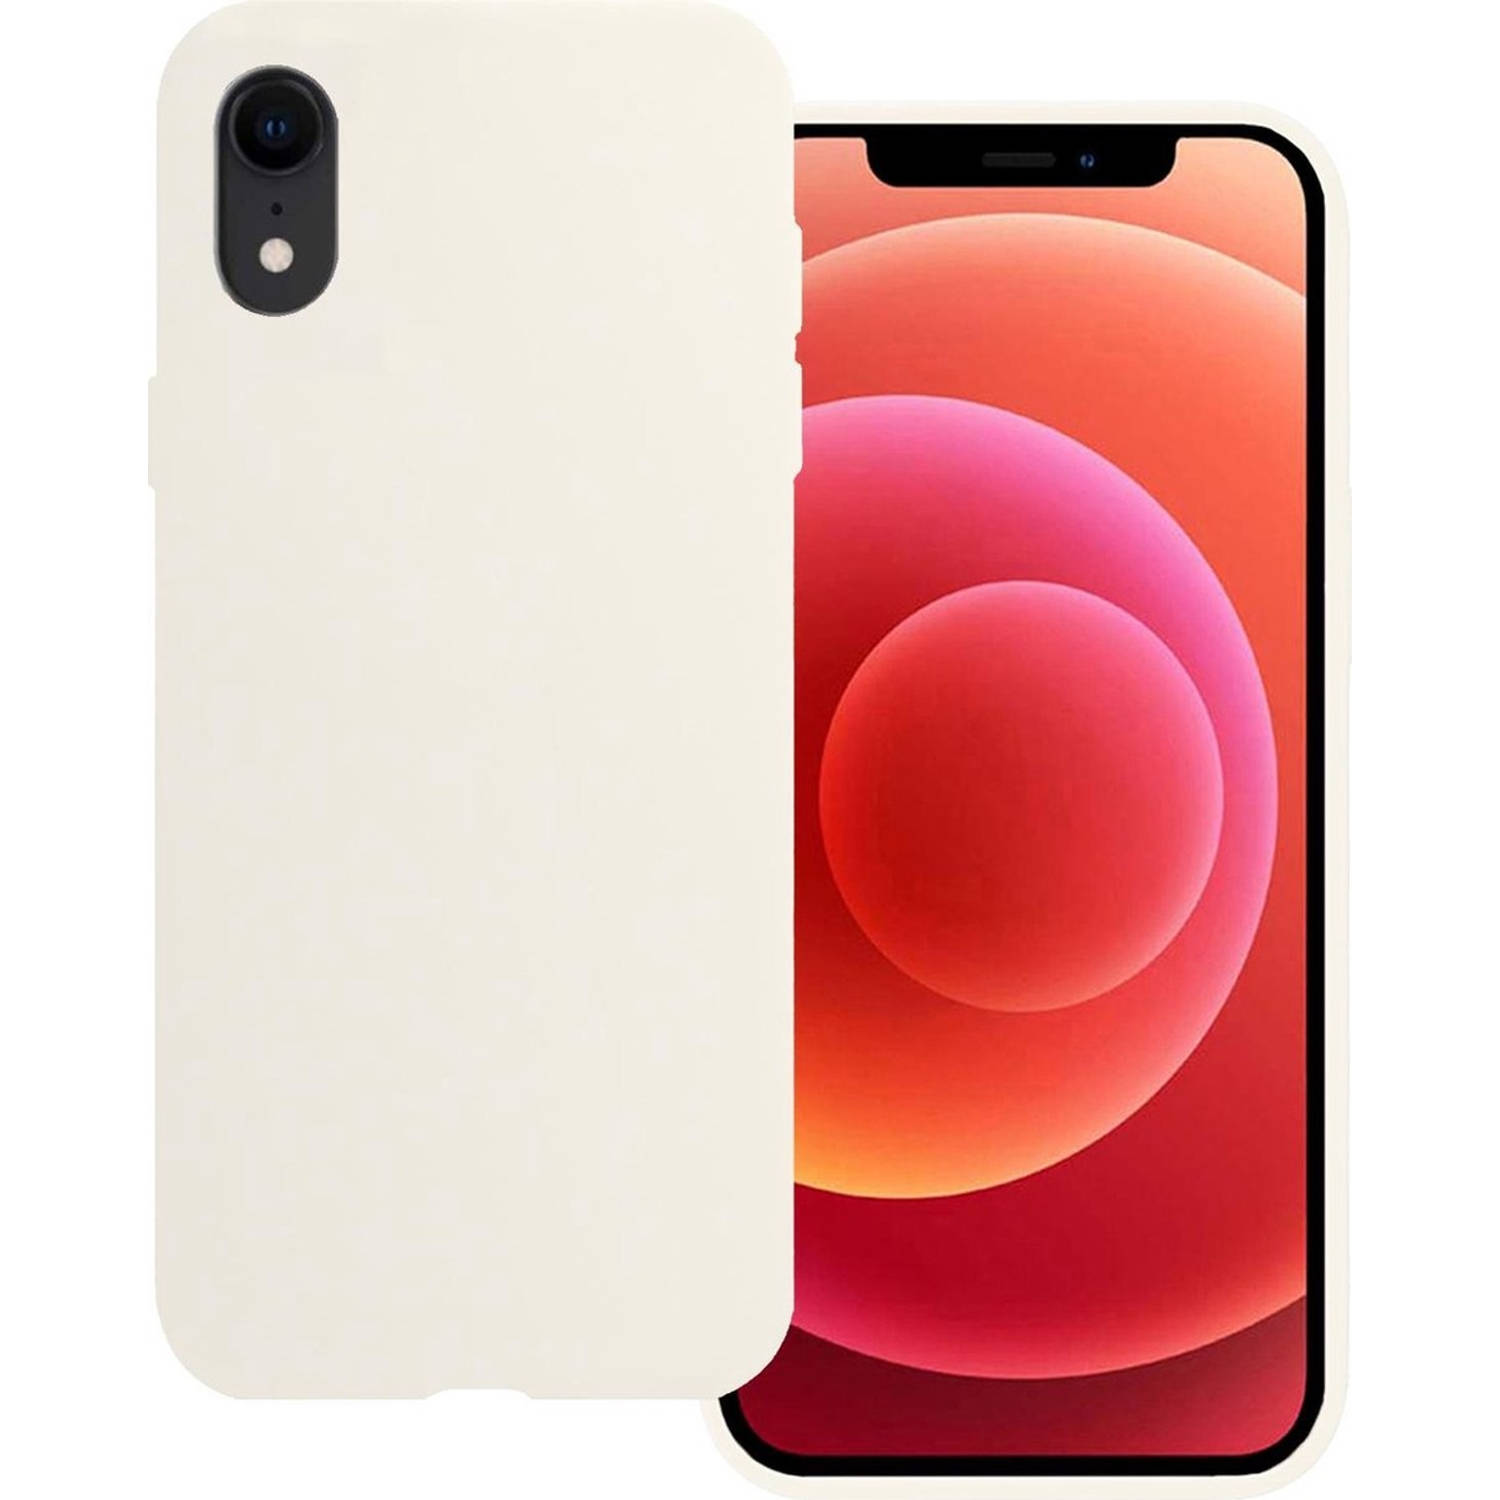 Basey iPhone XR Hoesje Siliconen Hoes Case Cover iPhone XR-Wit